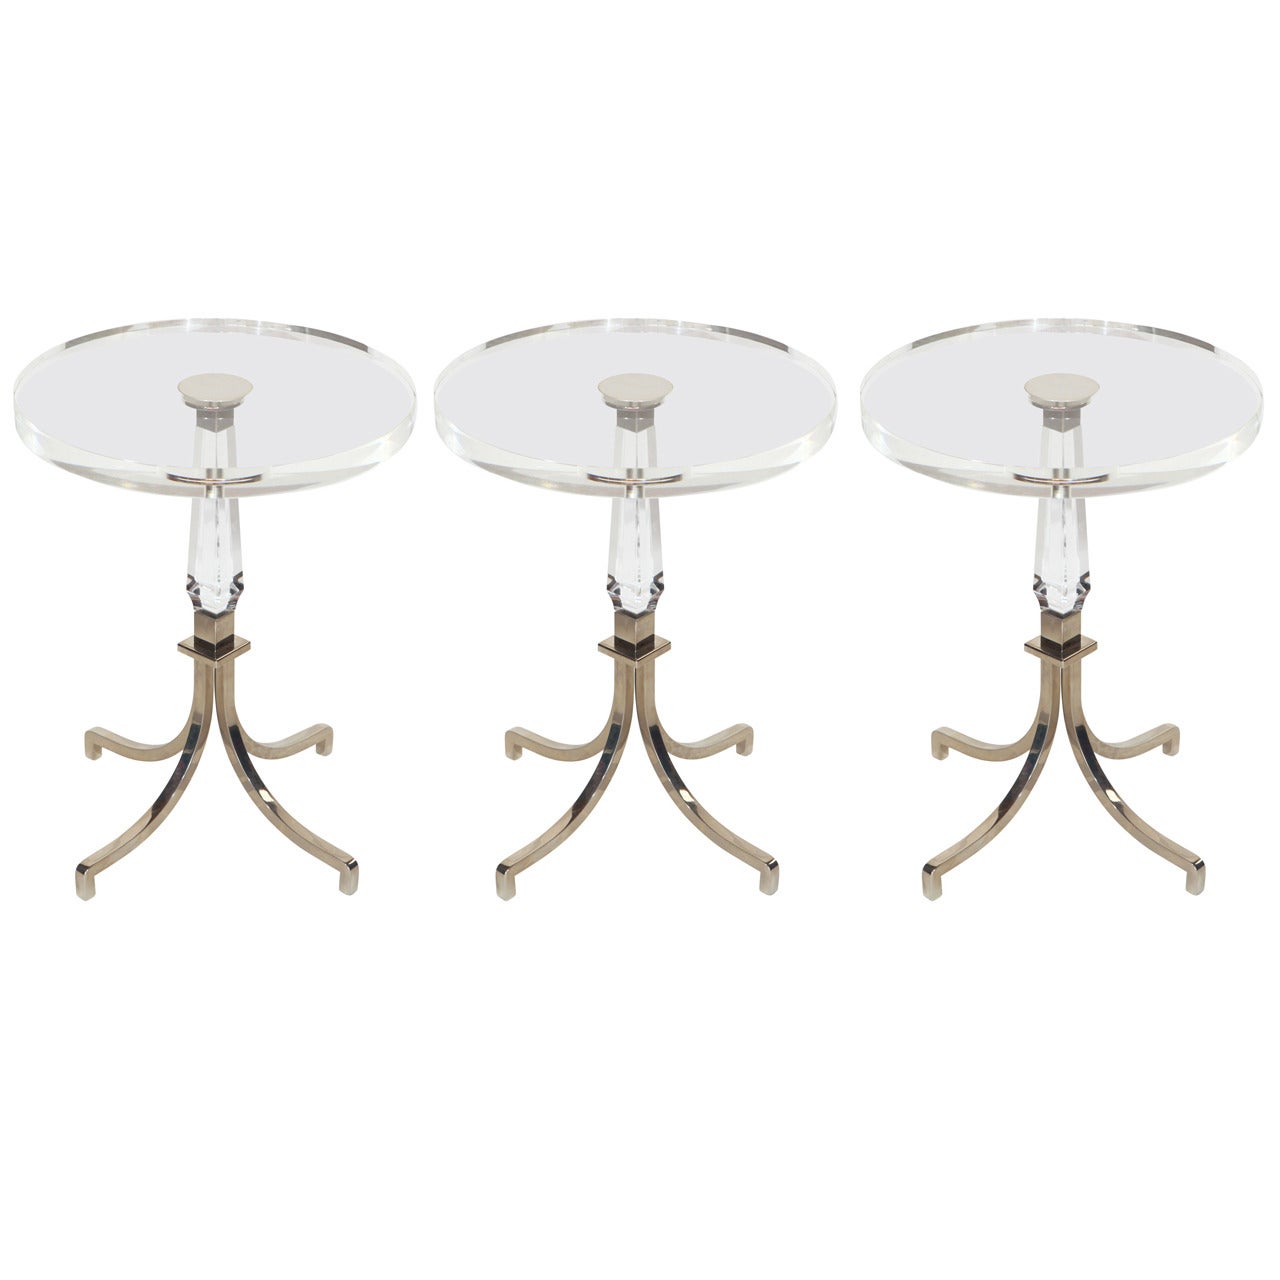 Pair of Lucite and Nickel Round Side Tables Signed by Charles Hollis Jones